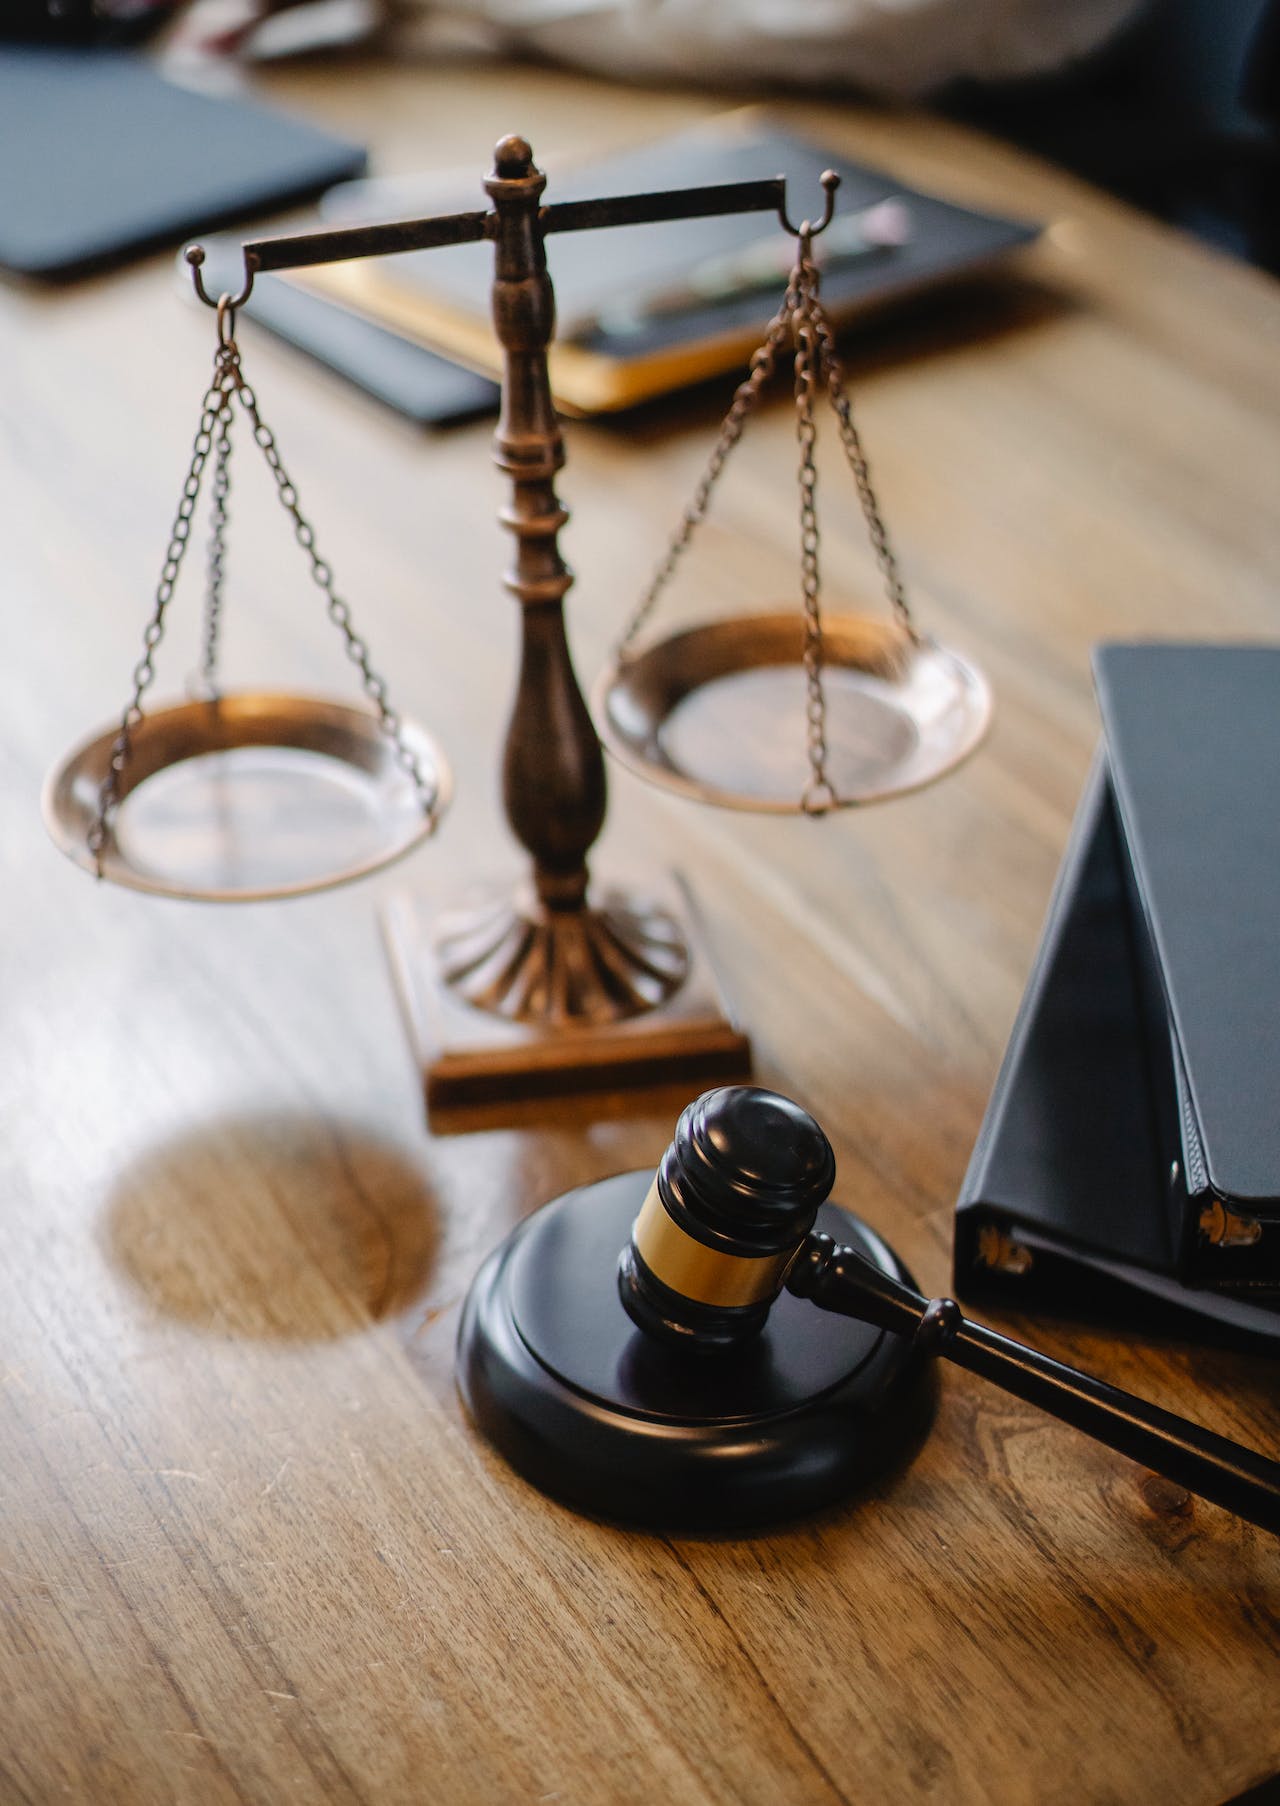 a judge's gavel next to the scales of justice on a wooden desk